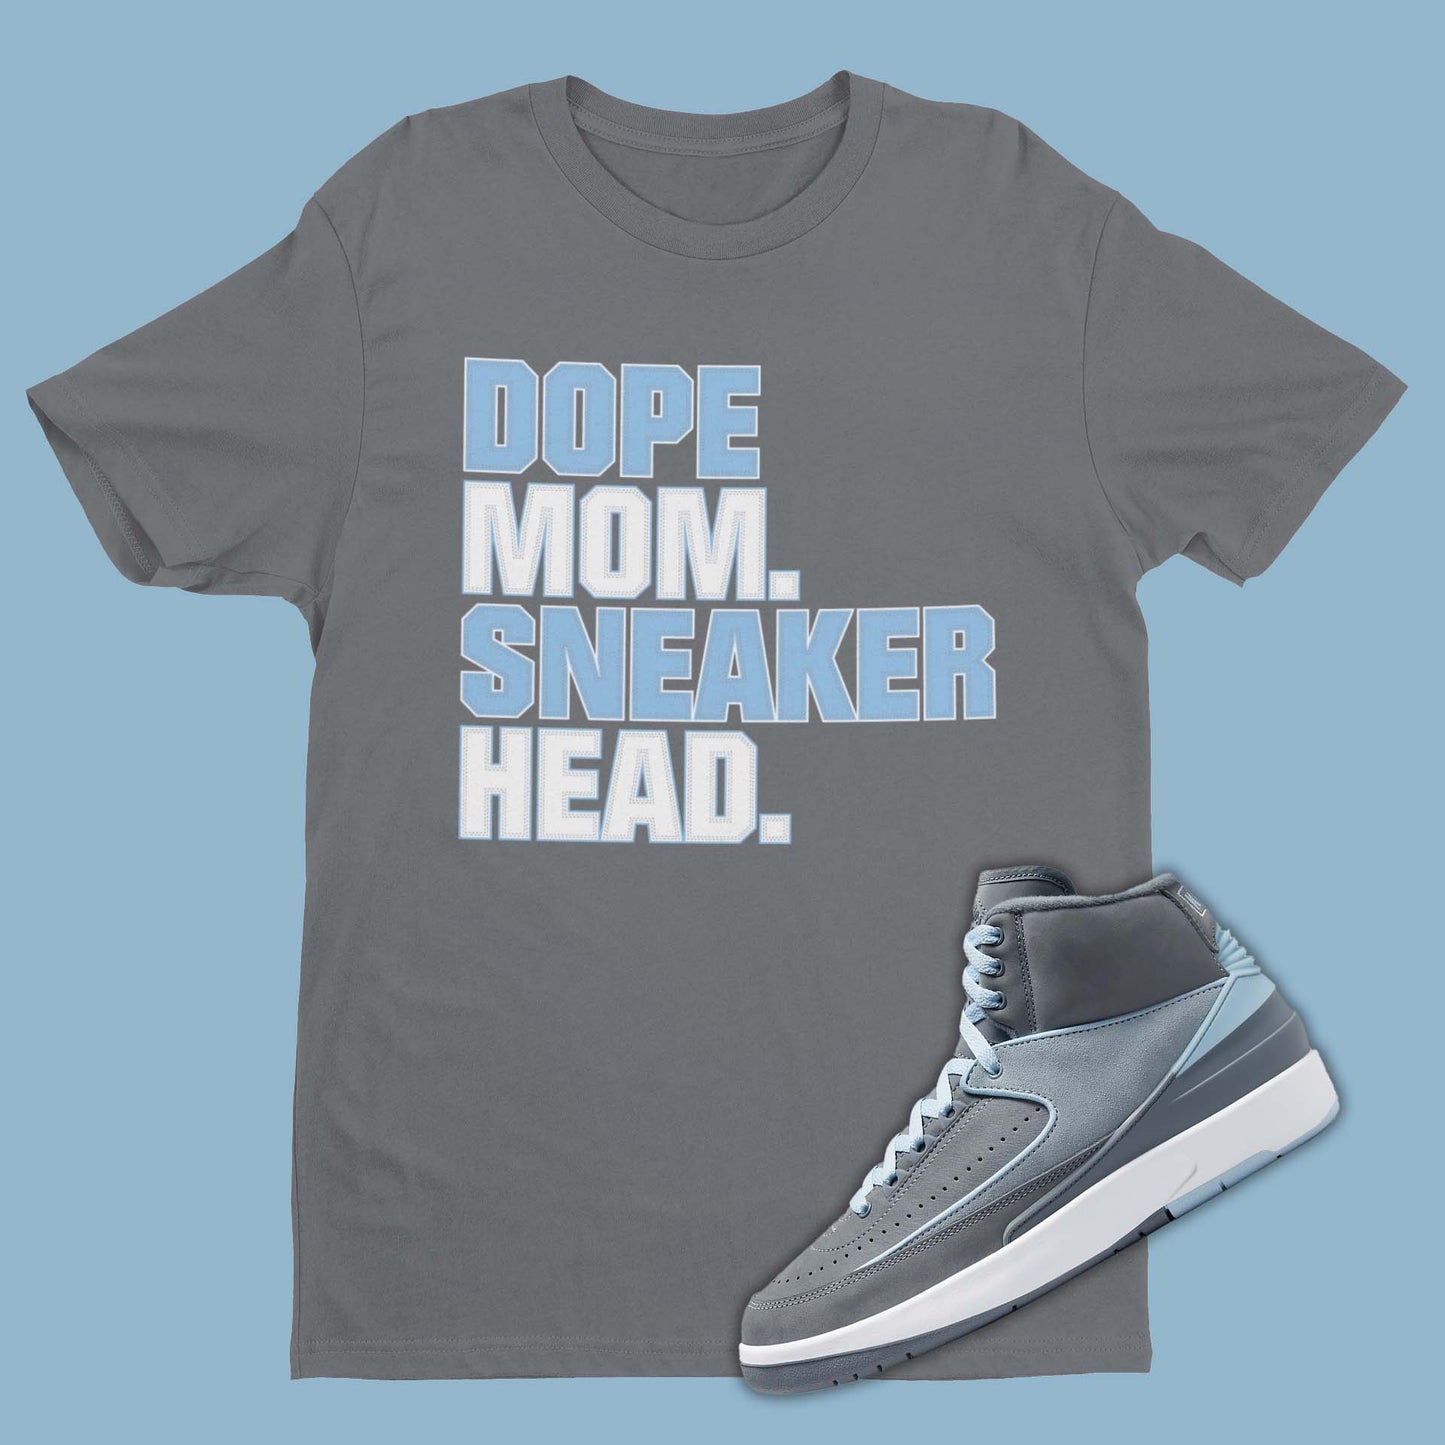 Grey t-shirt featuring a graphic of Dope Mom Sneaker Head text, designed to complement the sleek and stylish Air Jordan 2 Cool Grey sneakers